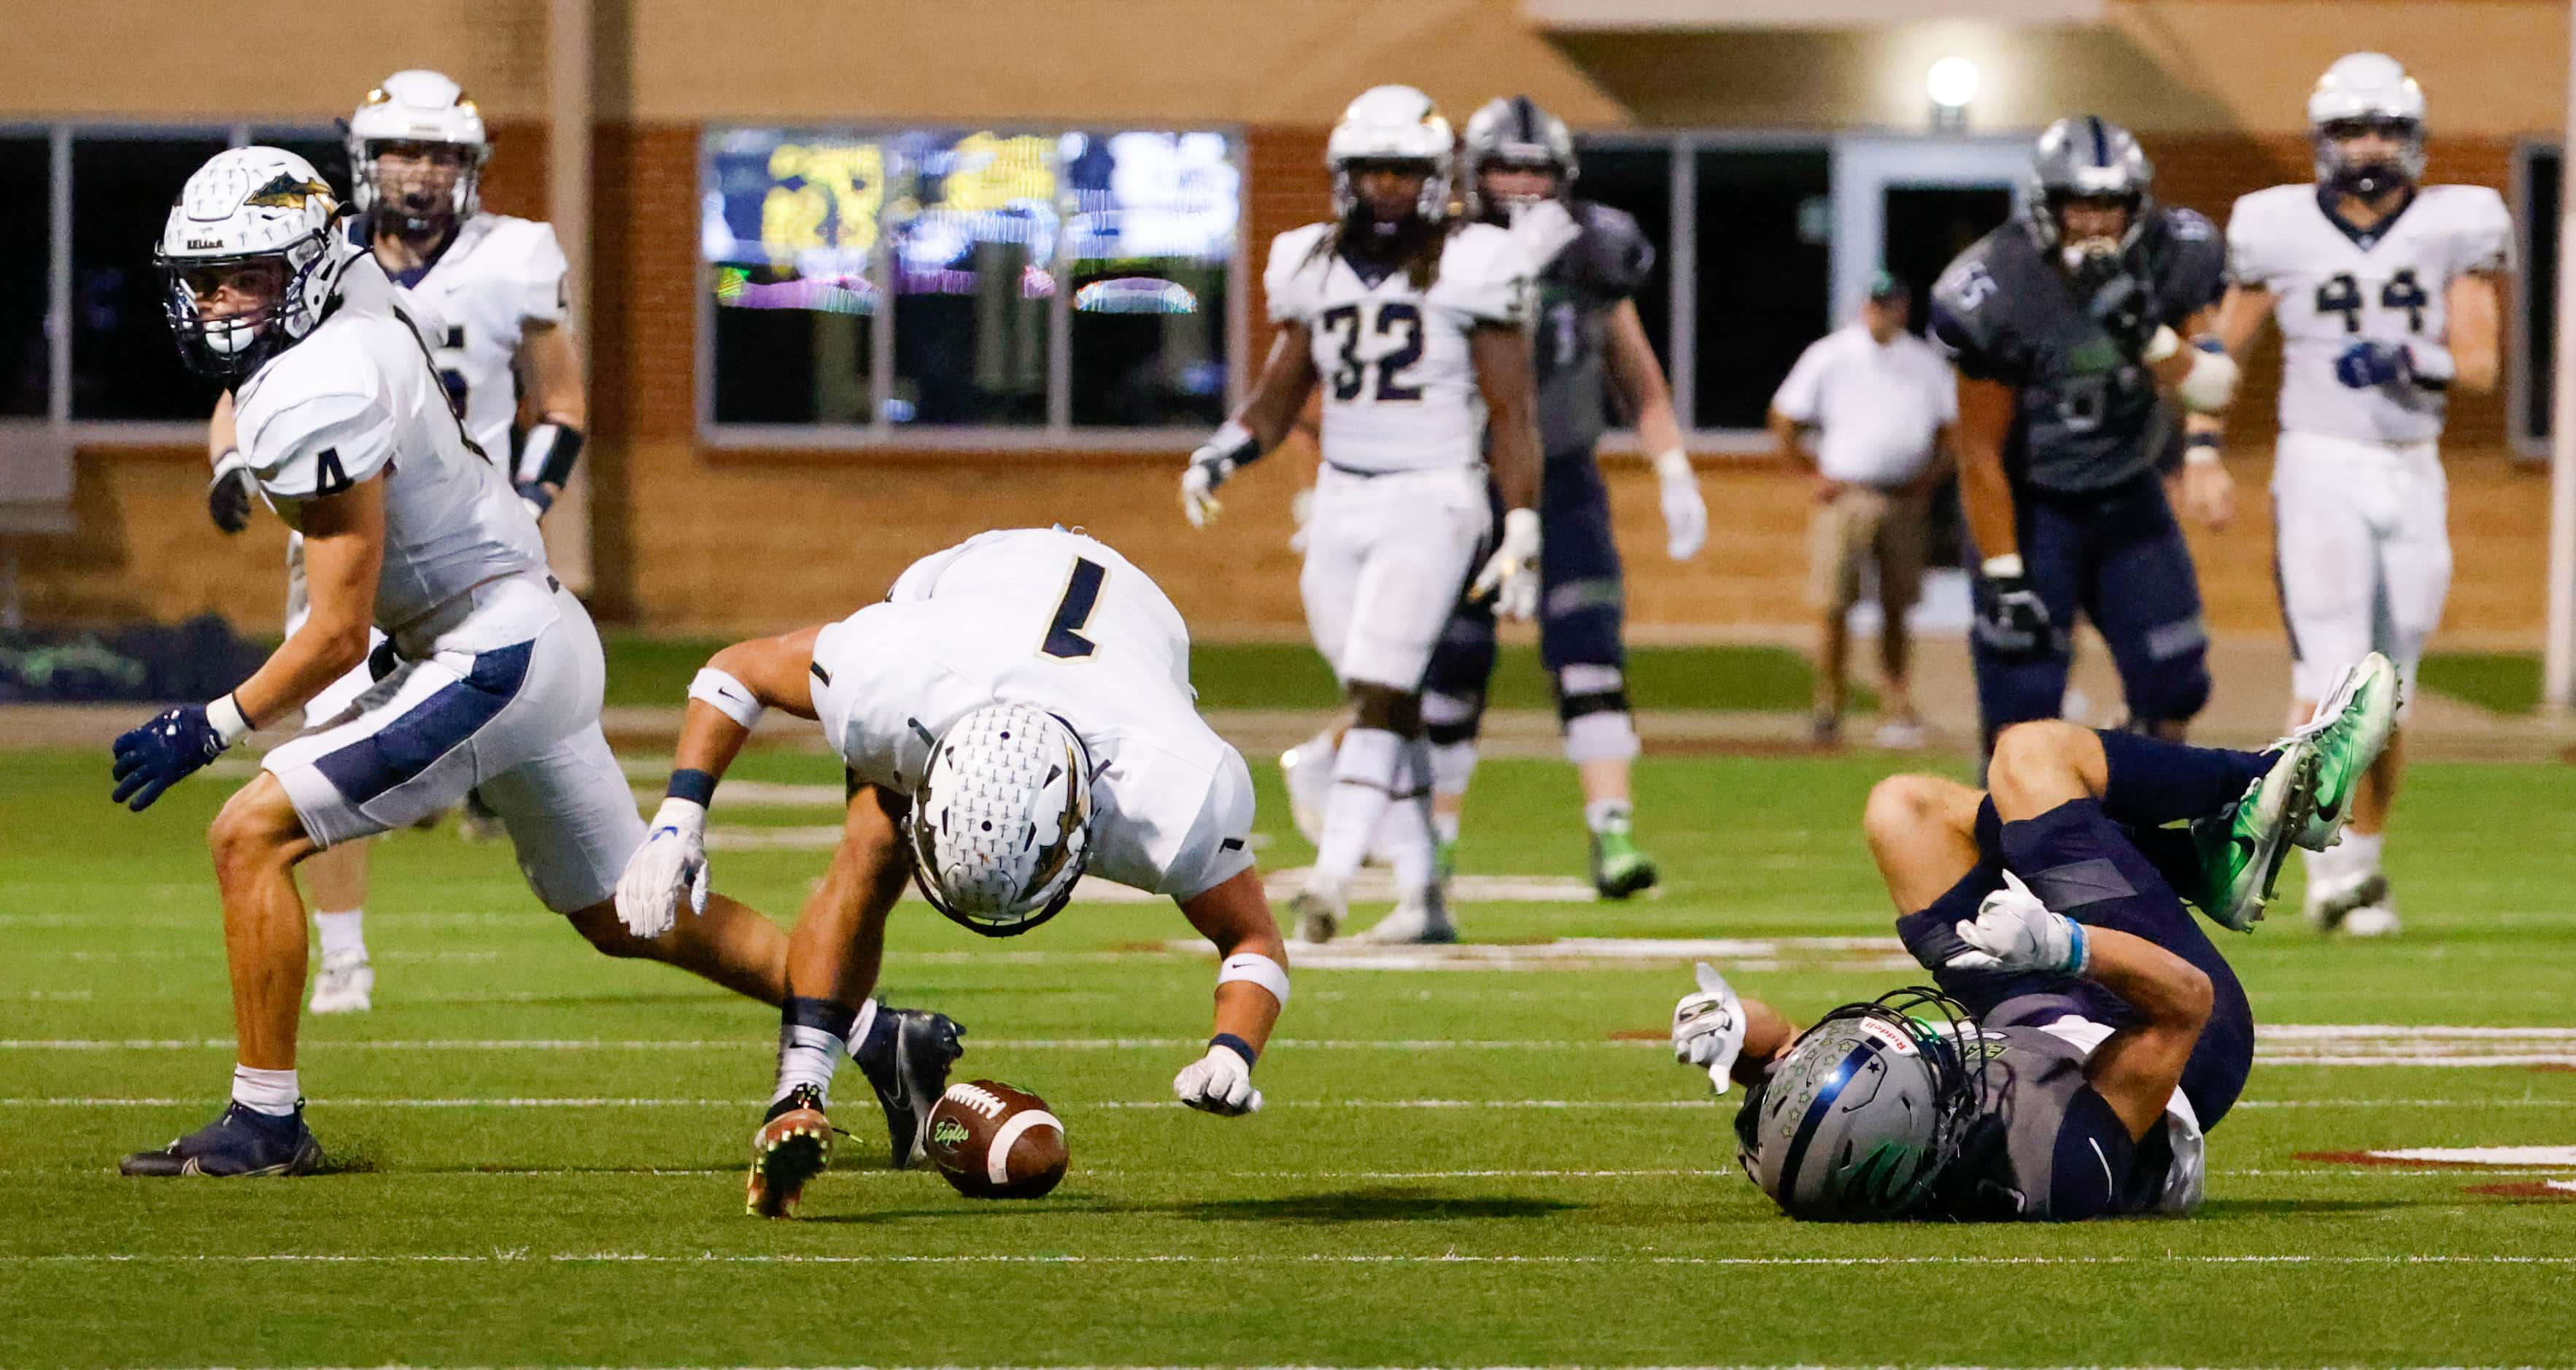 Keller High School defensive back Matthew Anderson (1) reaches for the ball after it slips...